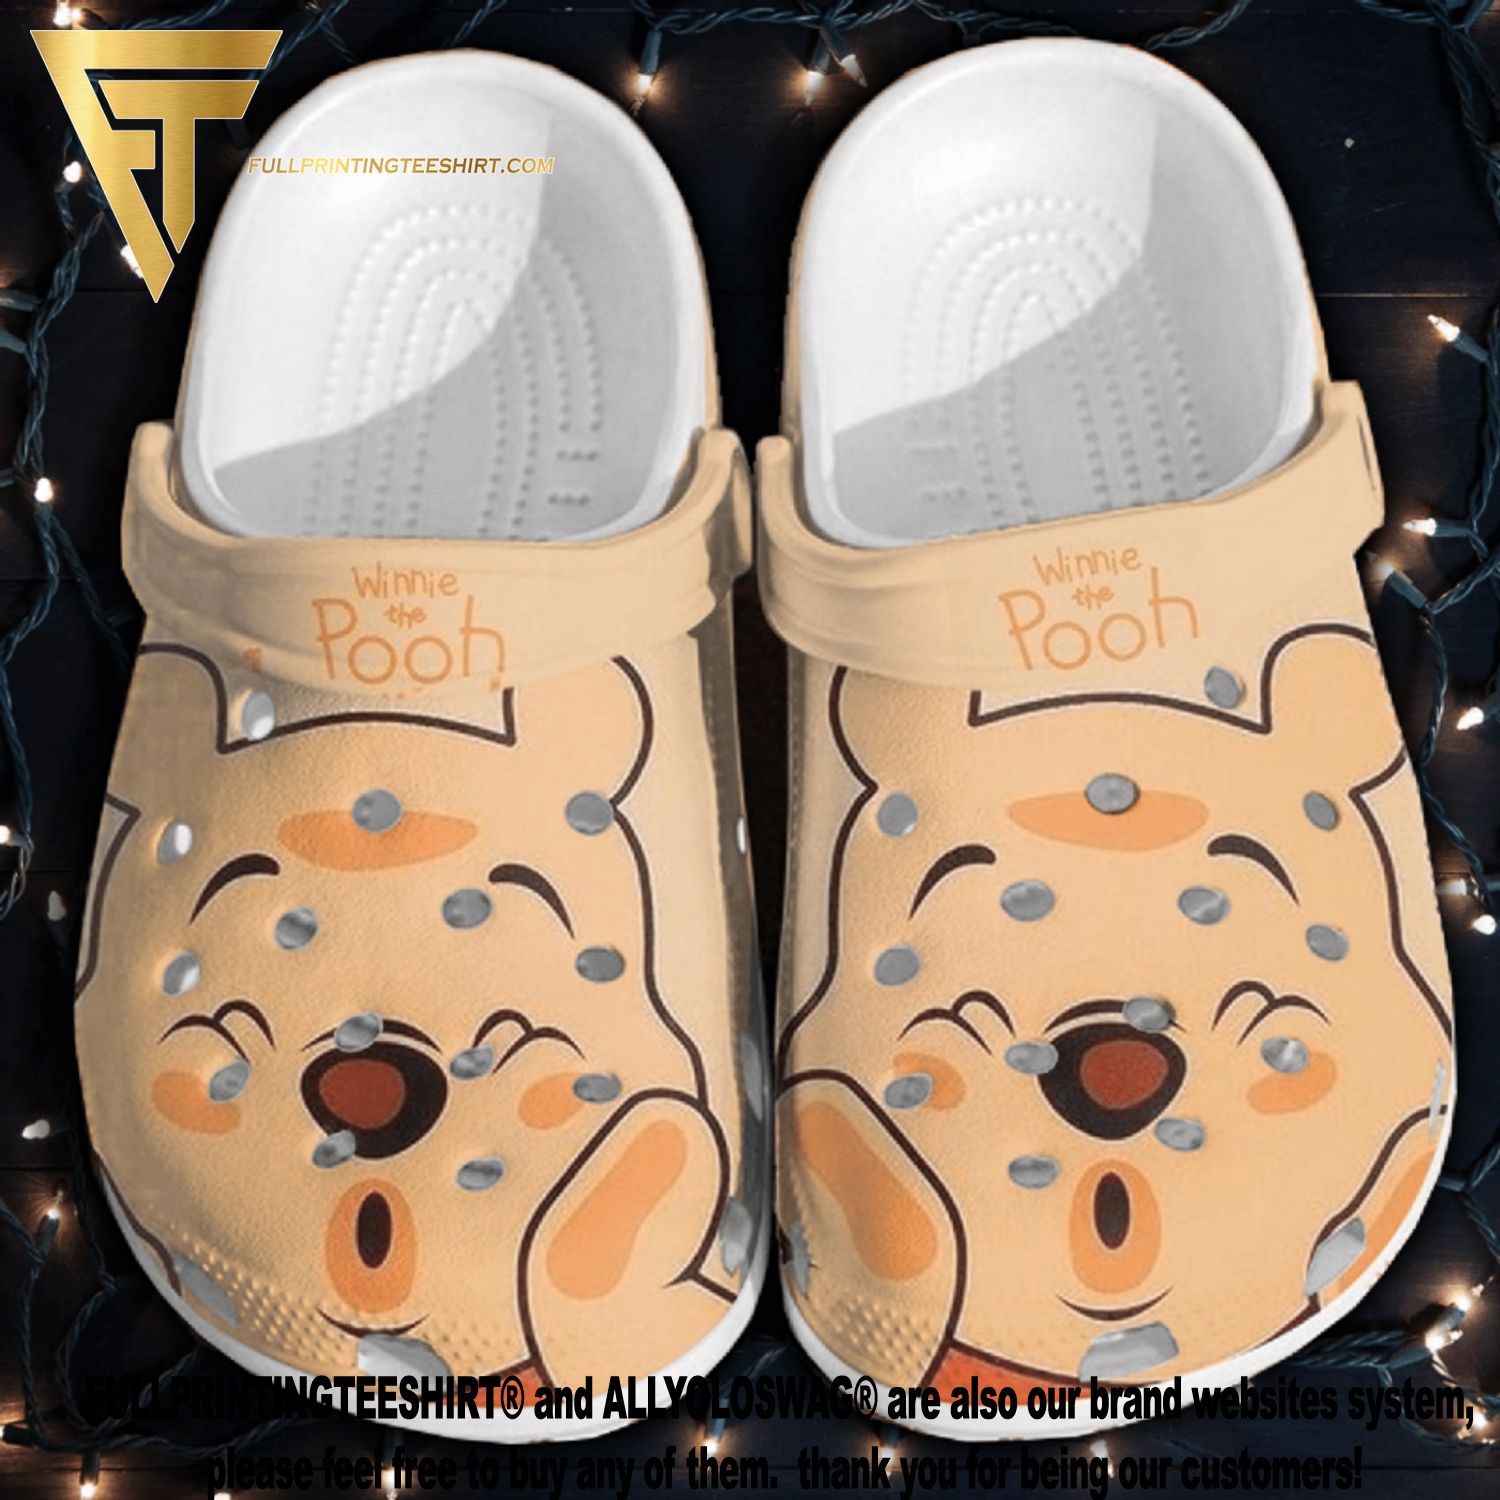 New Merch: Winnie the Pooh Crocs, crew beck and socks. Are you getting, crocs